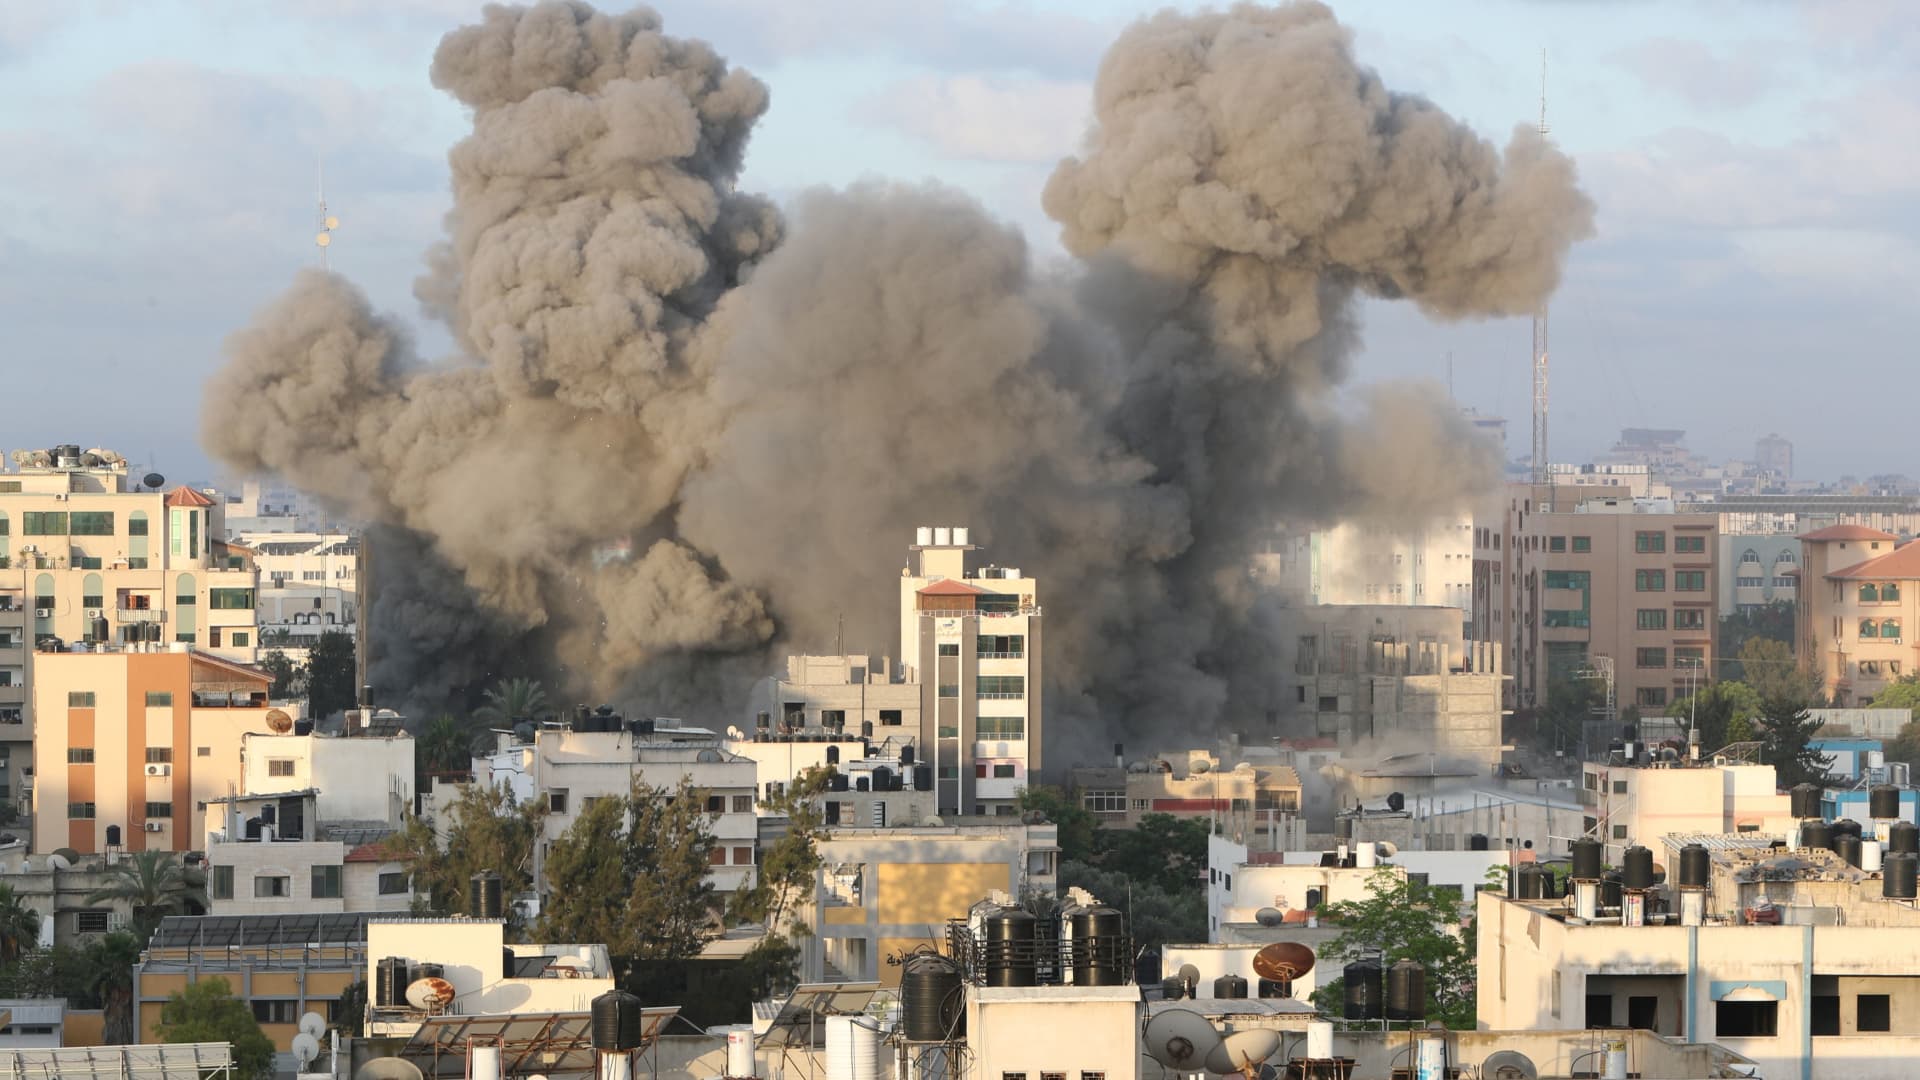 Smoke rises following an Israeli air strike on a building, amid a flare-up of Israeli-Palestinian fighting, in Gaza City May 18, 2021.